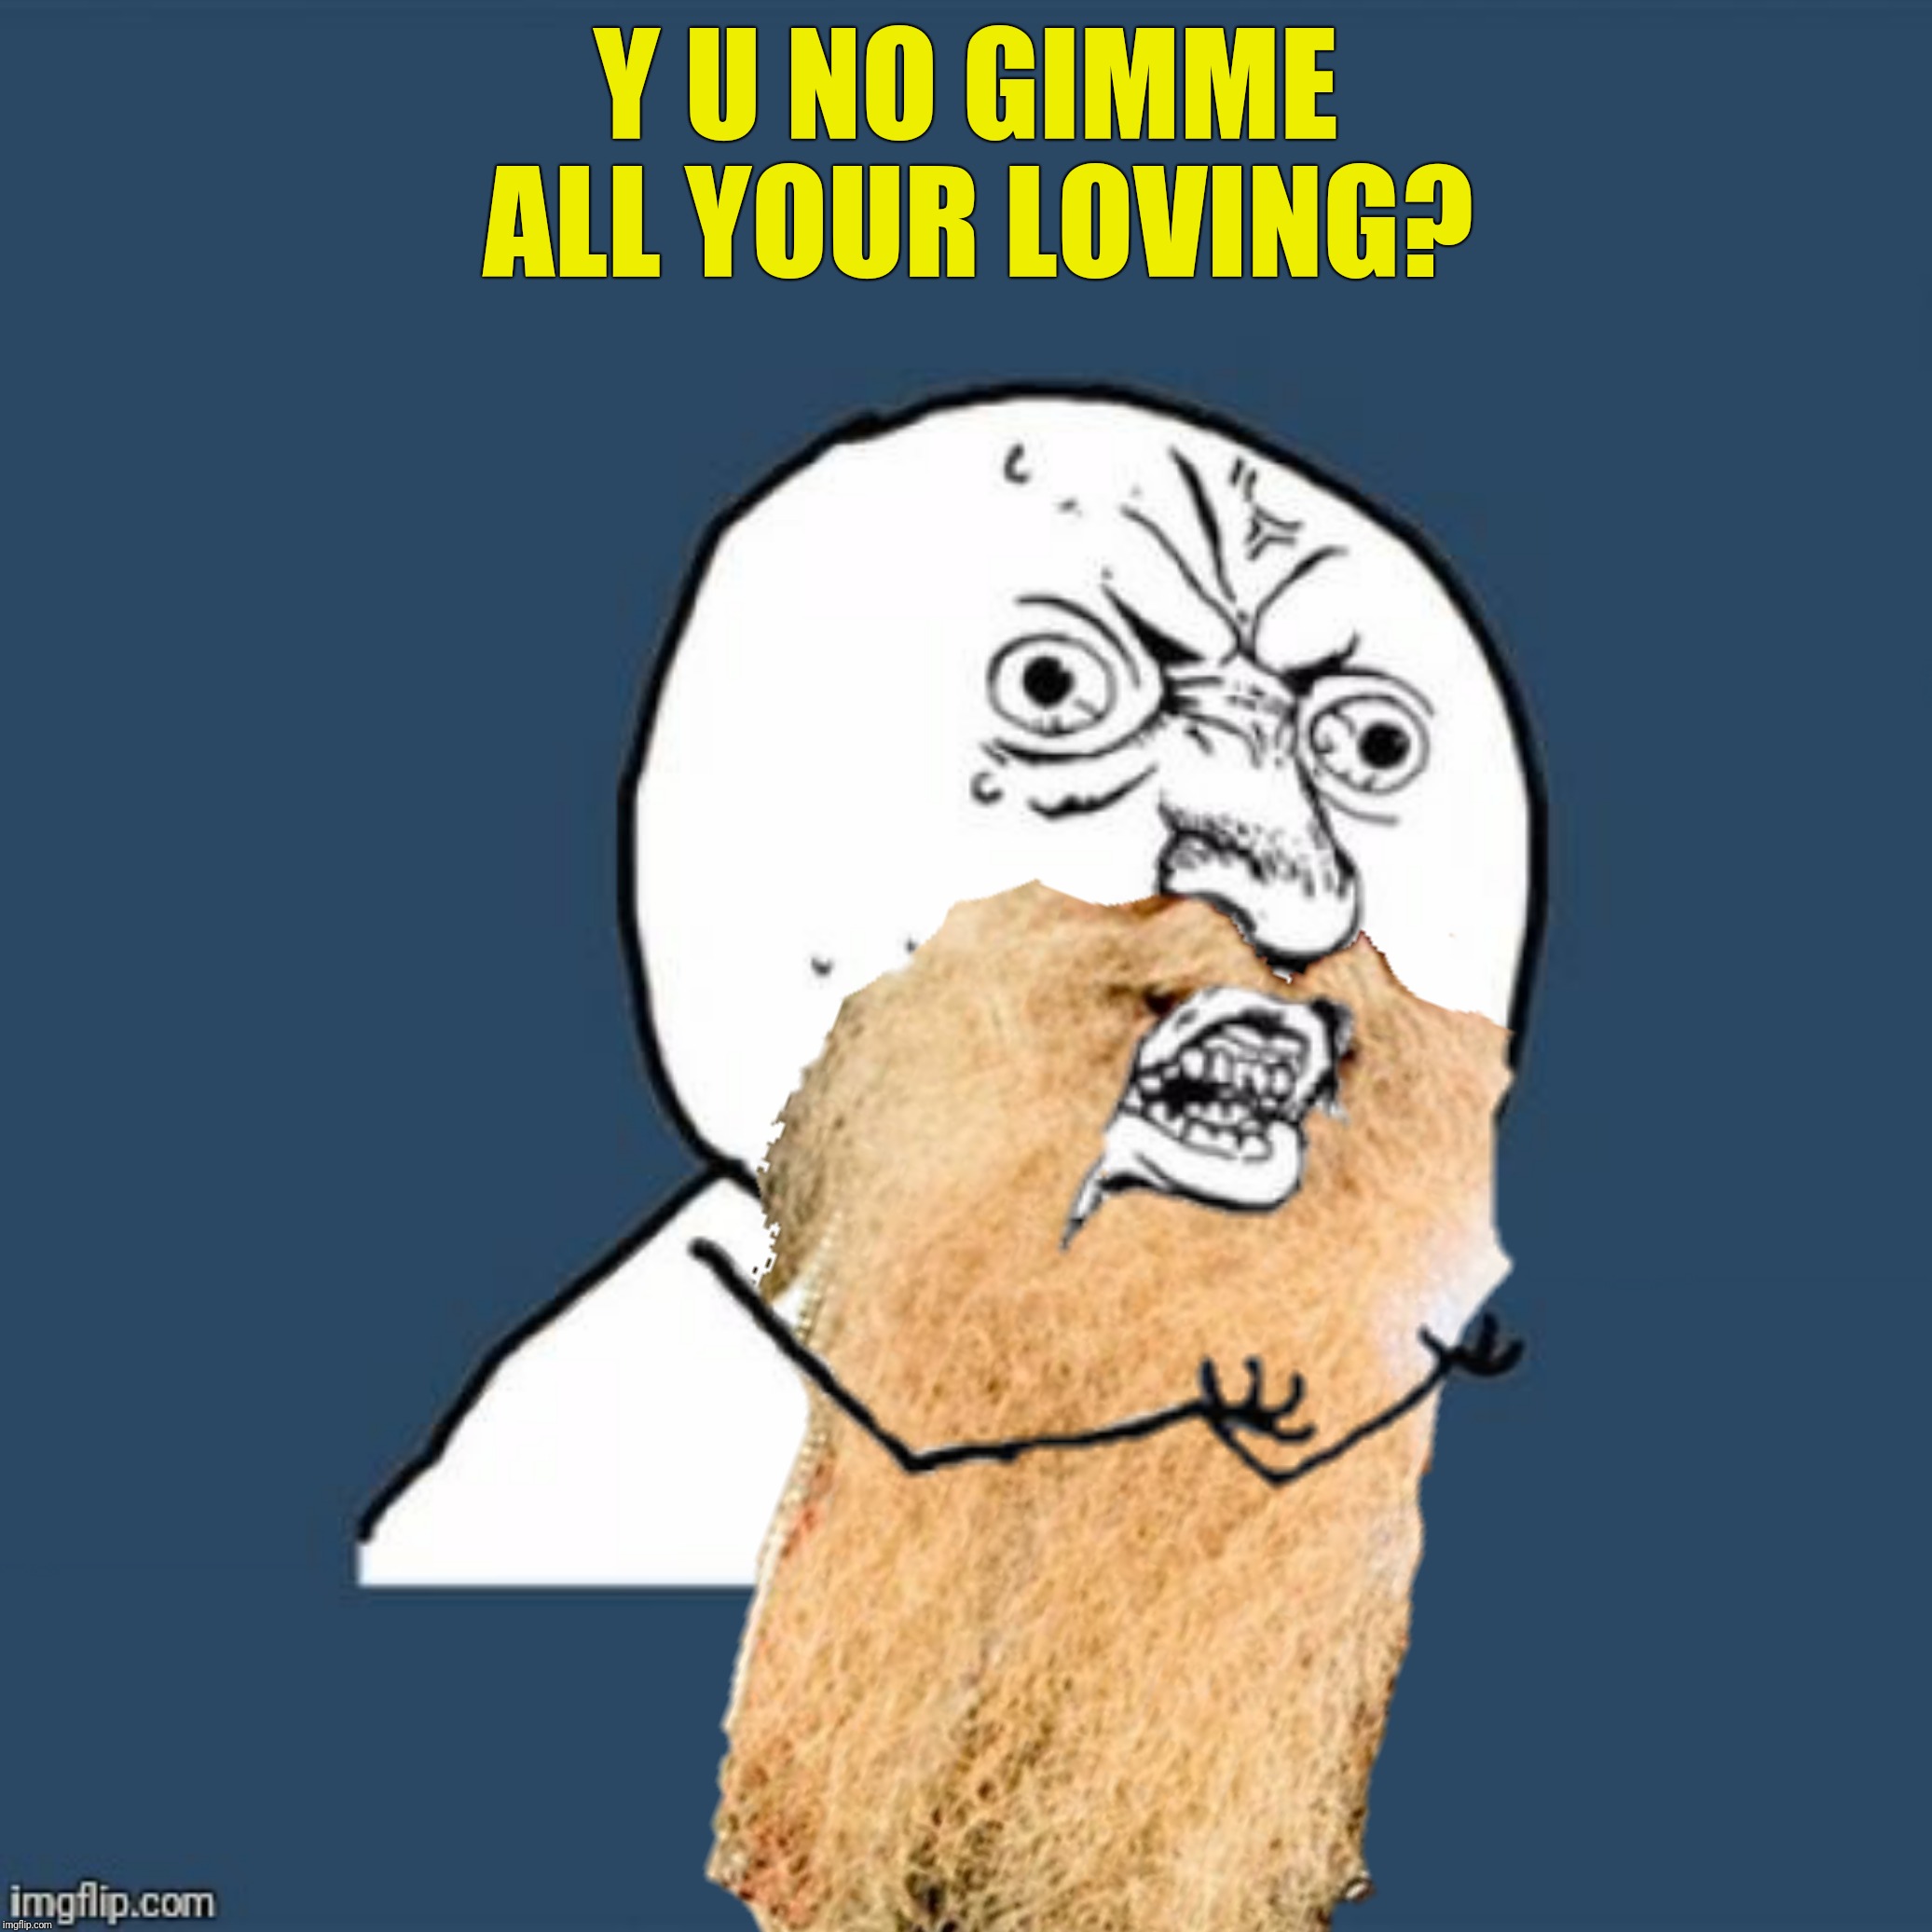 Bad Photoshop Sunday presents:  Bad Photoshop Sunday meets Y U NOvember,  A socrates and punman 21 event | Y U NO GIMME ALL YOUR LOVING? | image tagged in bad photoshop sunday,y u november,zz top,billy gibbons,y u no,gimme all your loving | made w/ Imgflip meme maker